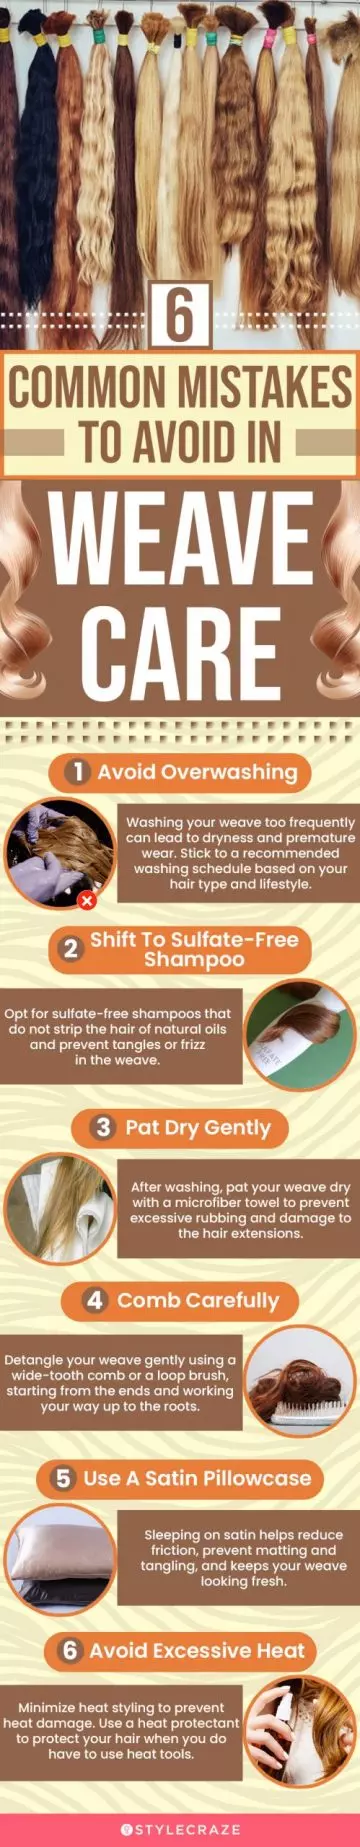 6 Common Mistakes To Avoid In Weave Care (infographic)